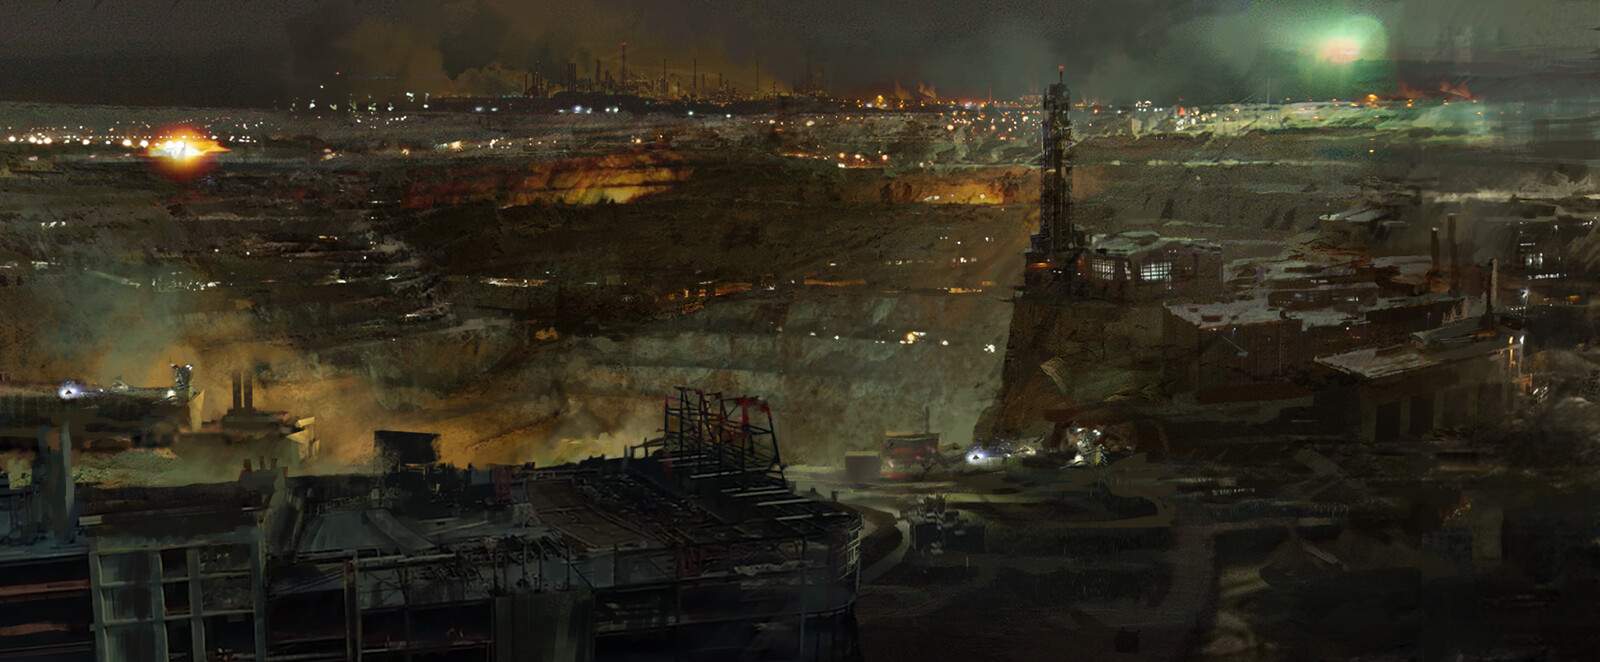 Concept which is Based on an Idea about Russian Diamond Mining Area